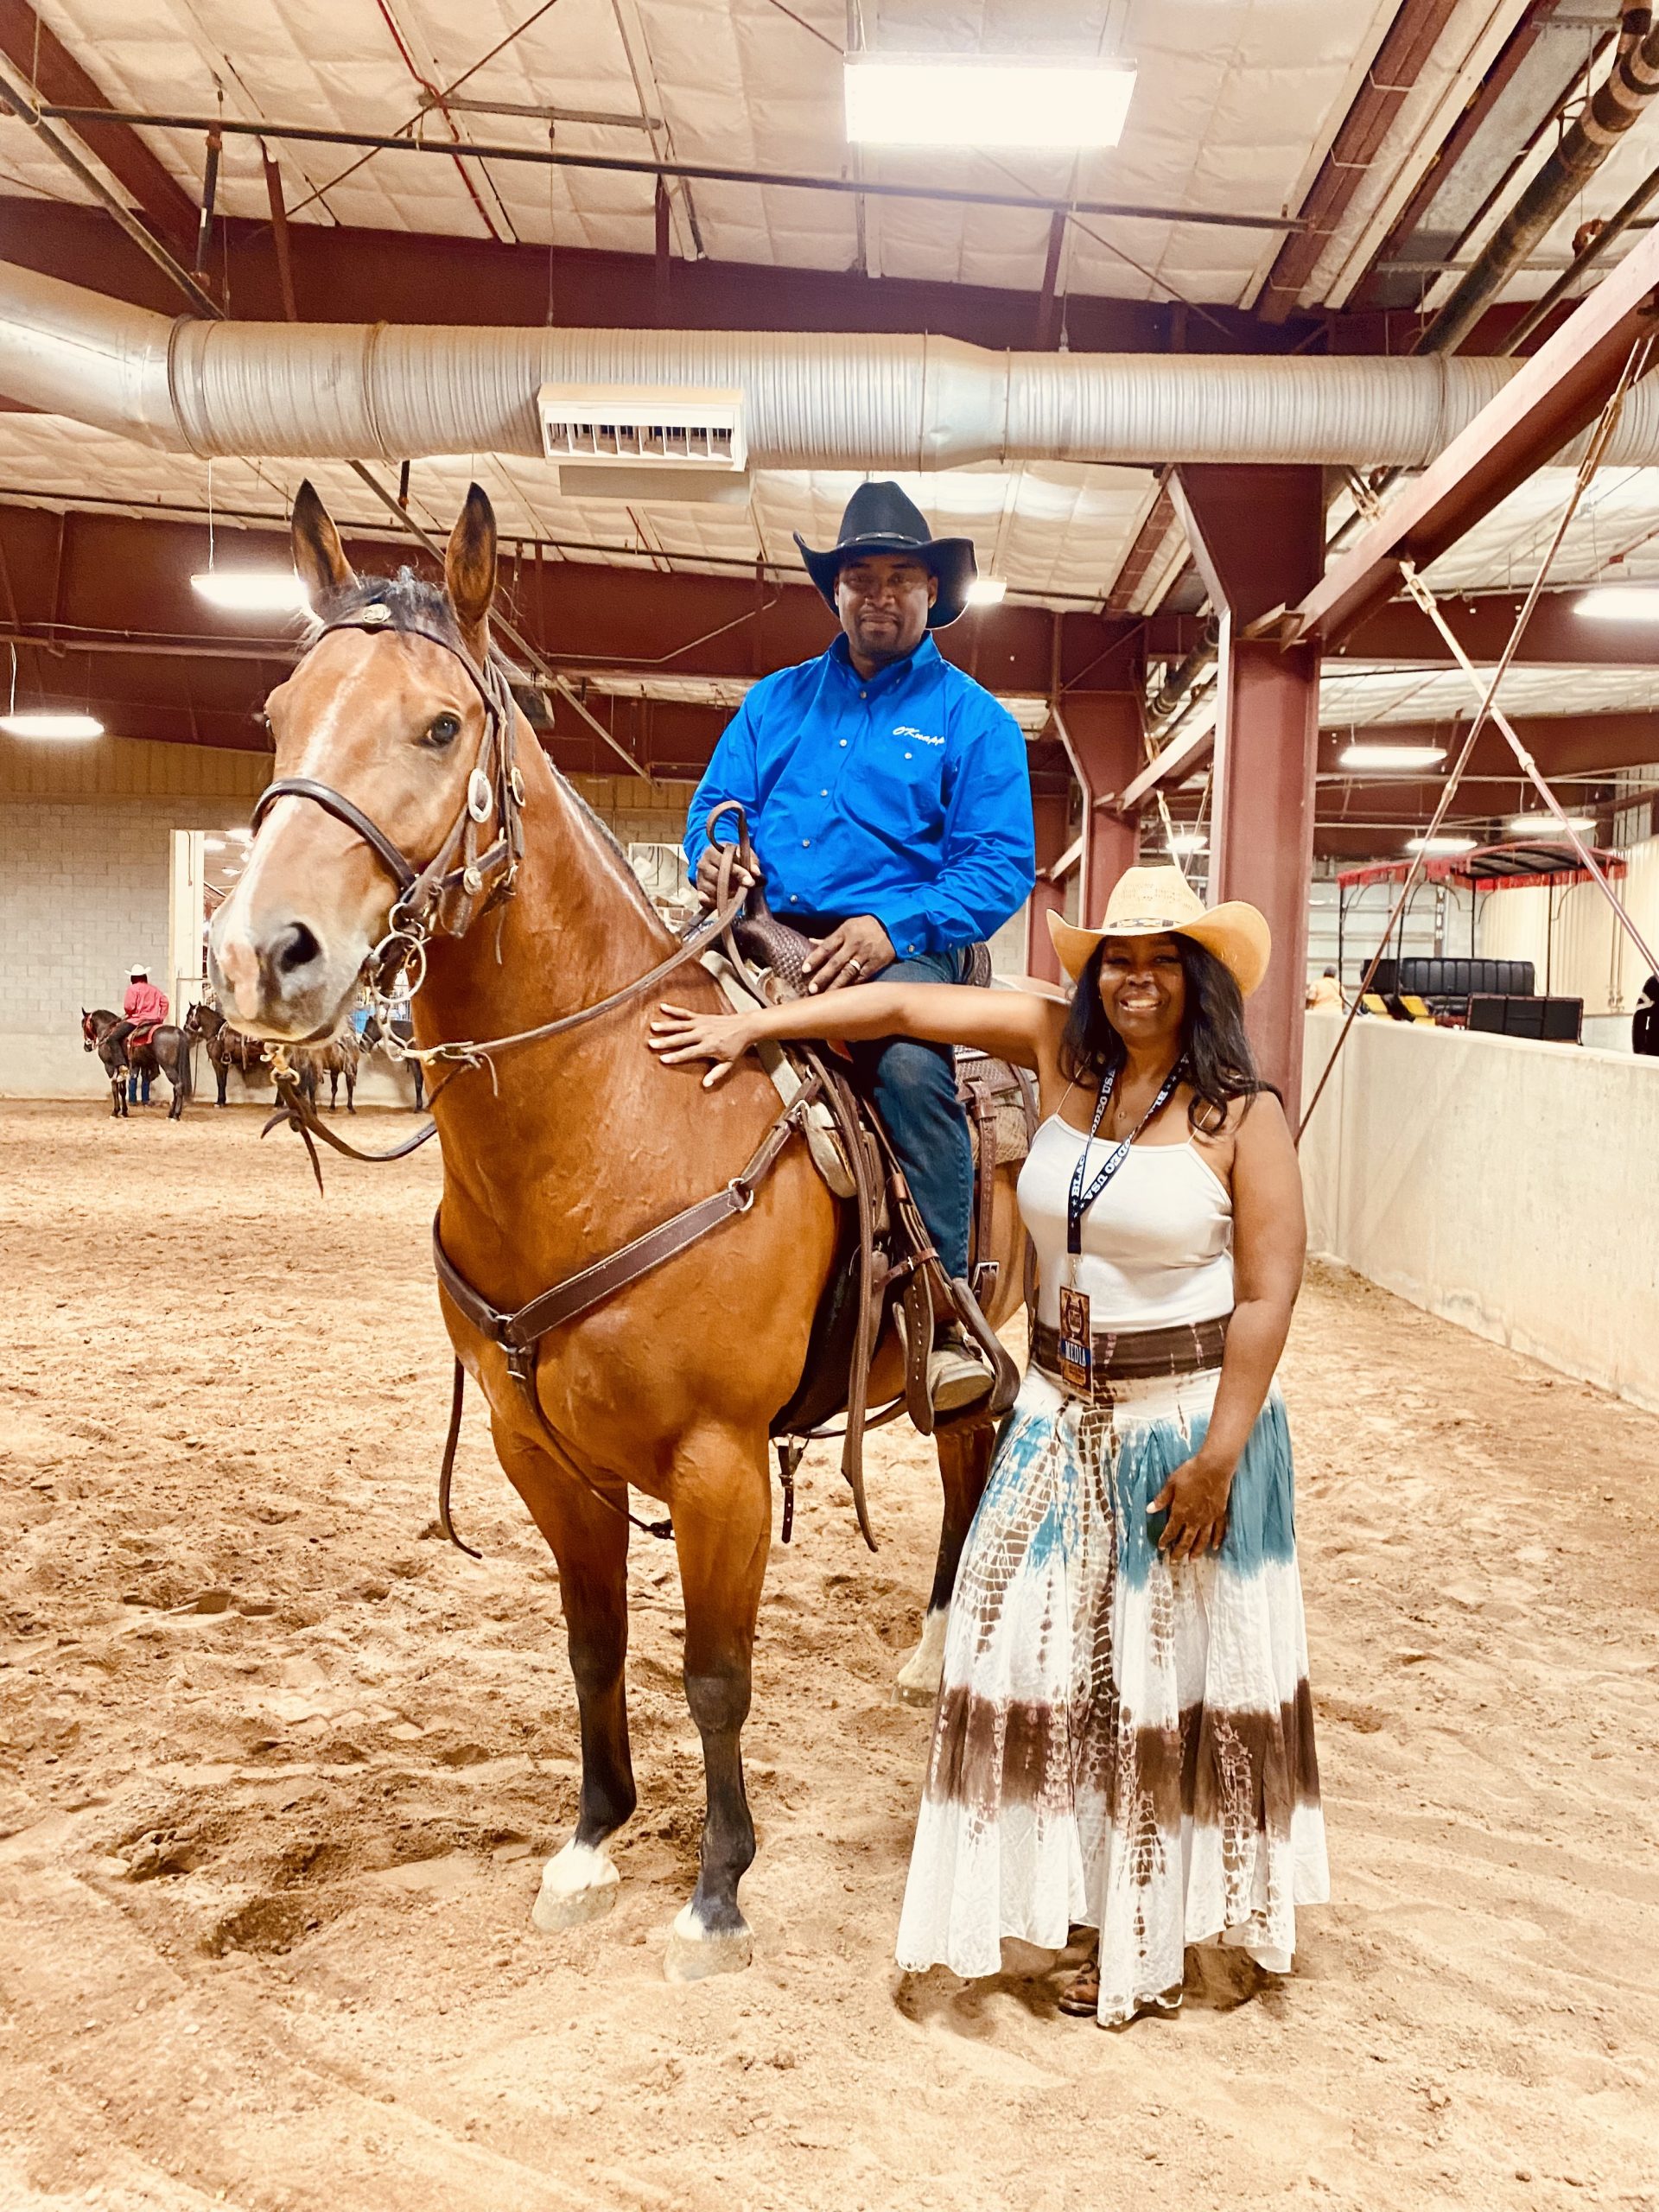 My Experience At My First Black Rodeo In Phoenix, Arizona!